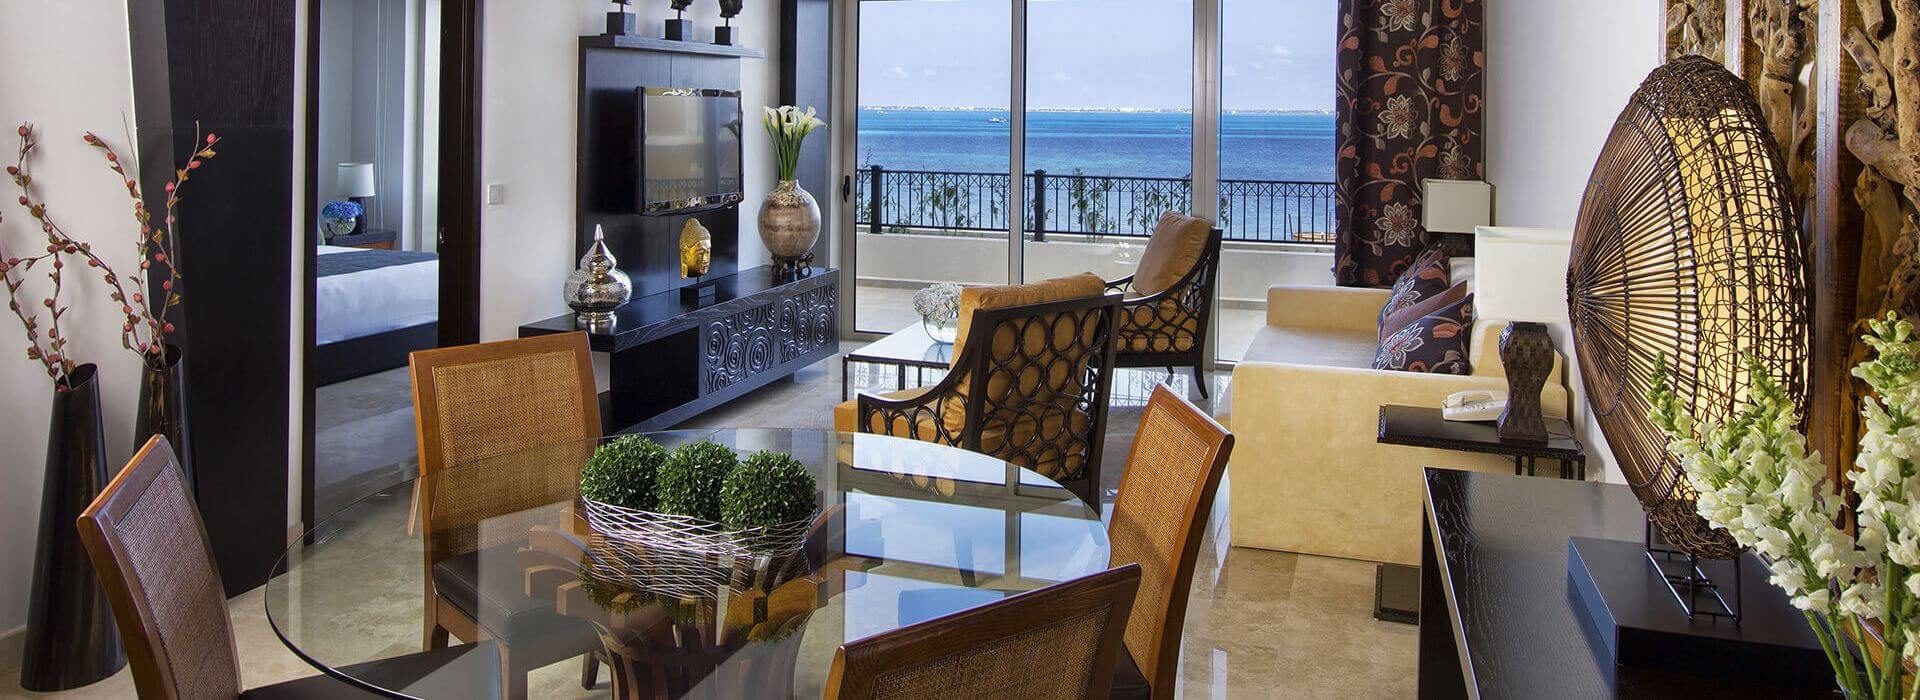 Living room and dining area with glass table, leather furniture, a flat screen TV, and sliding doors leading out to a balcony with ocean views.